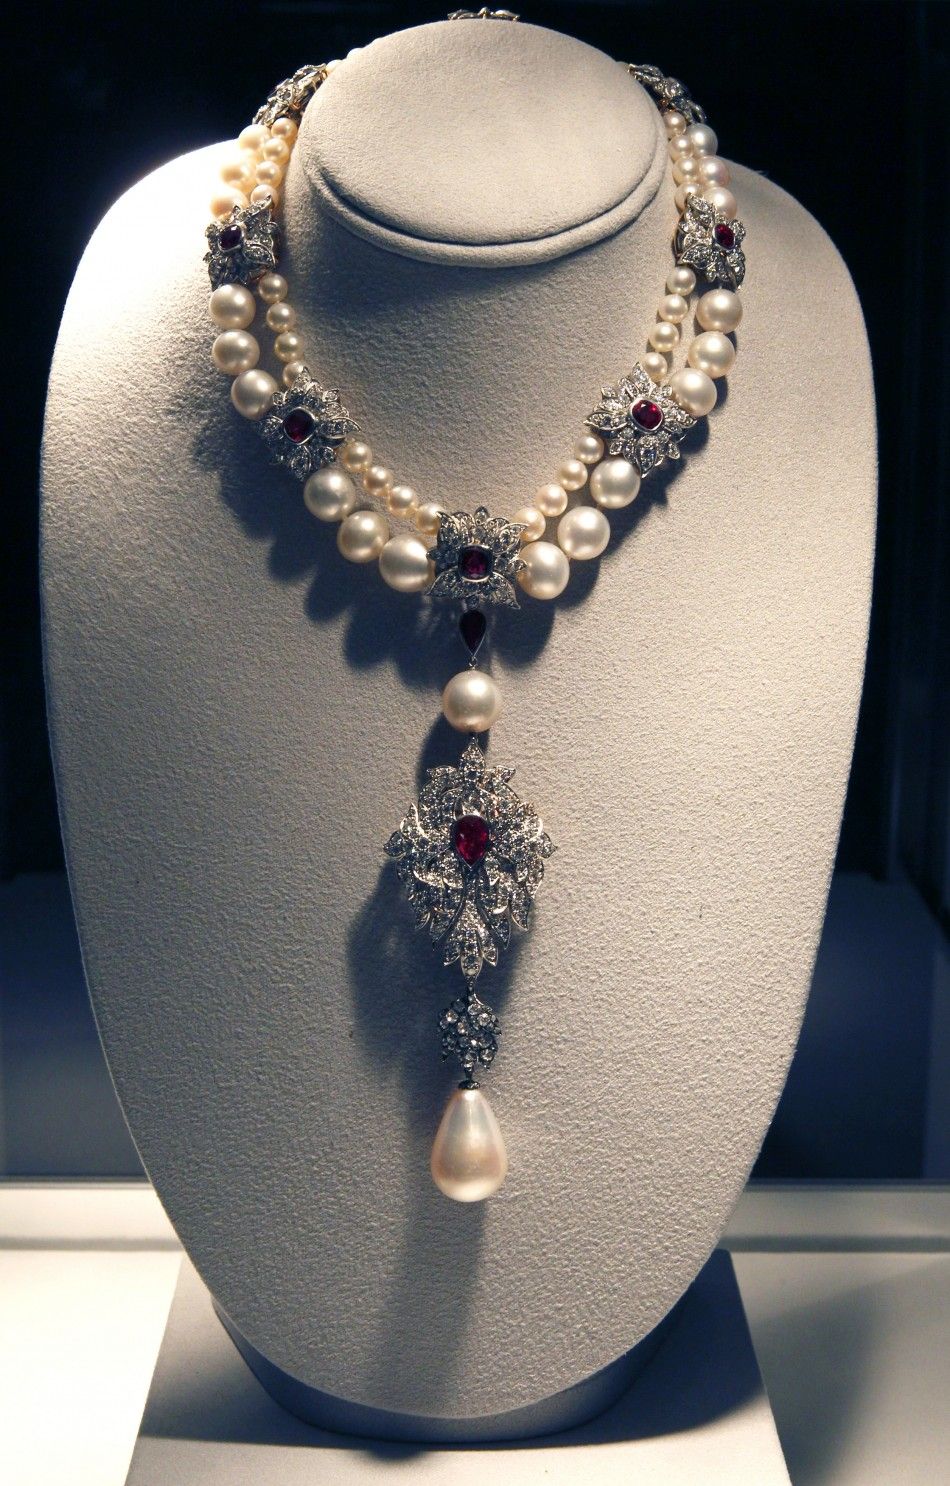 A ruby, diamond and pearl necklace by Cartier with the La Peregrina 60-carat natural pearl pendant is pictured at the press preview for Christies auction of The Collection of Elizabeth Taylor featuring her jewelry, haute couture, fashion, and fine arts a